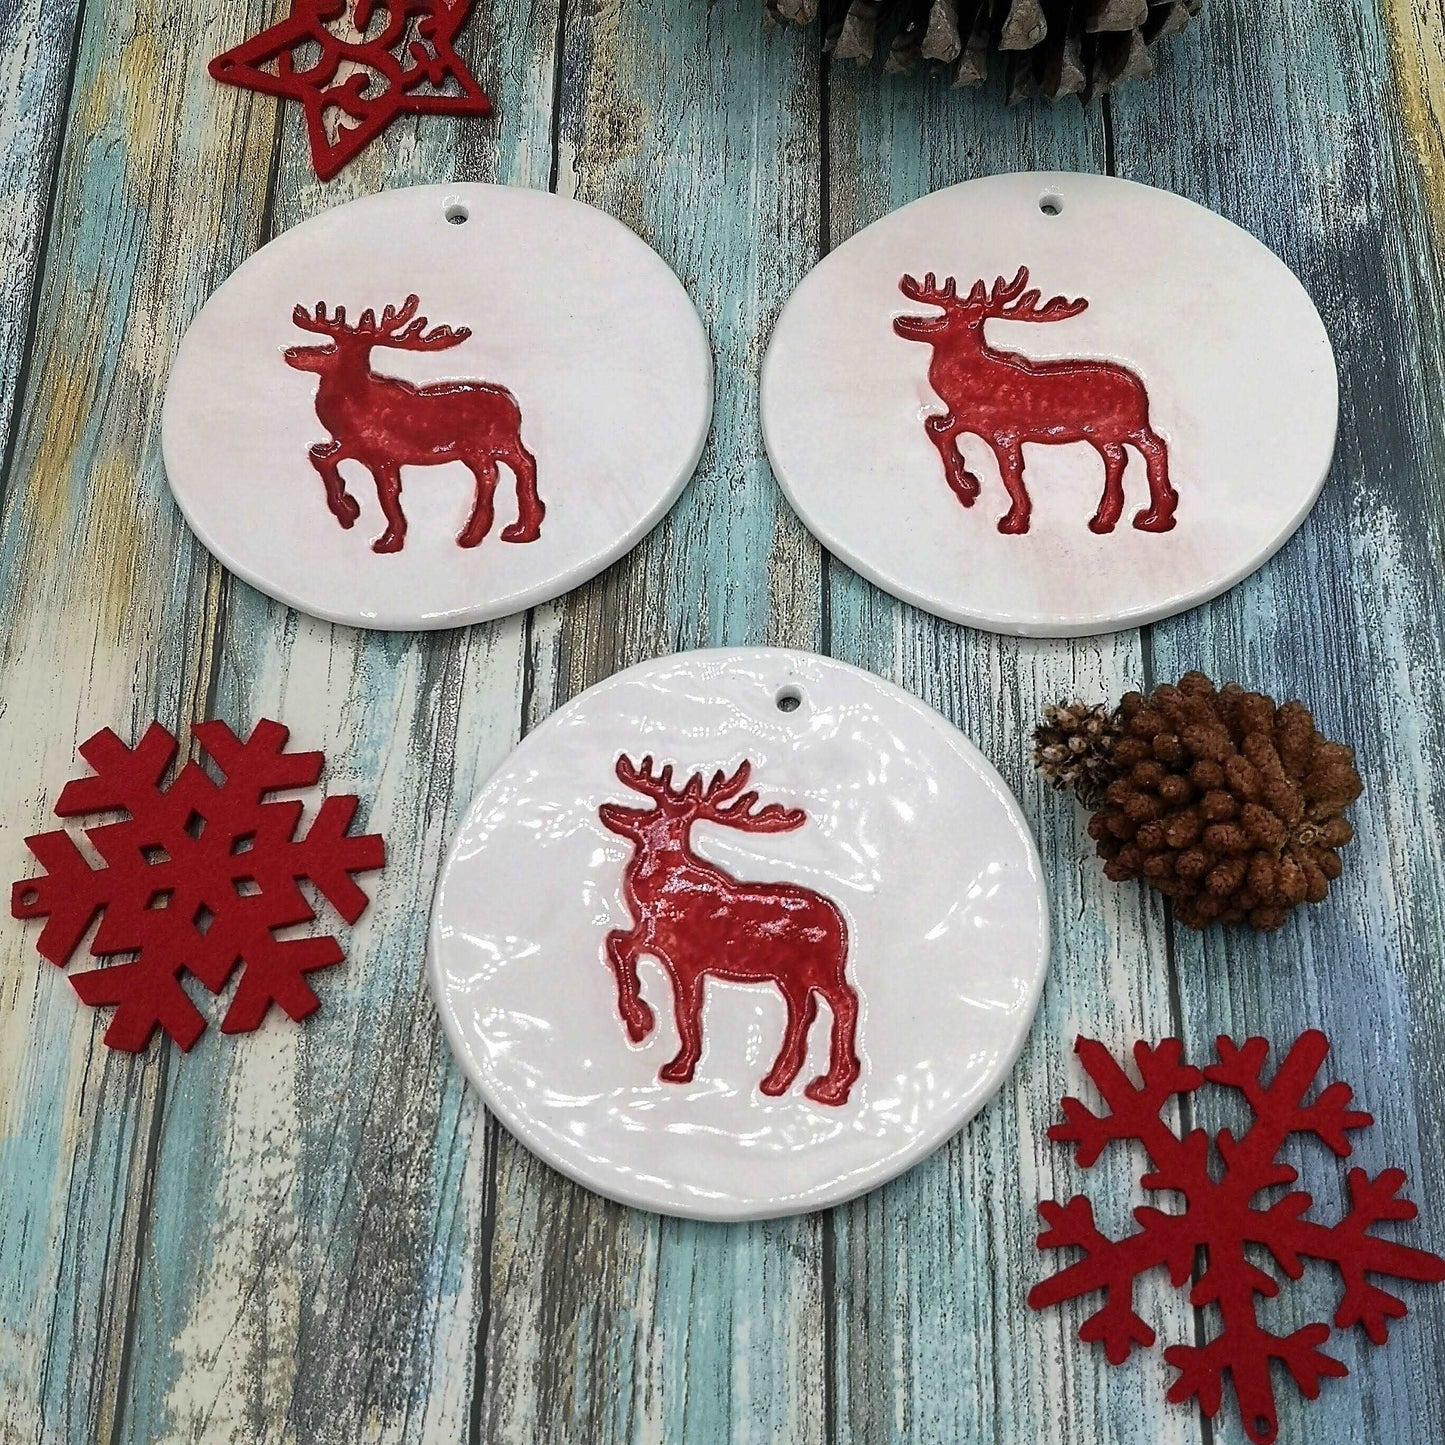 1Pc Handmade Ceramic Reindeer Ornaments For Wall Decor, Christmas Tree Red and White Ornaments, Pottery Wall Hanging For Winter Decoration